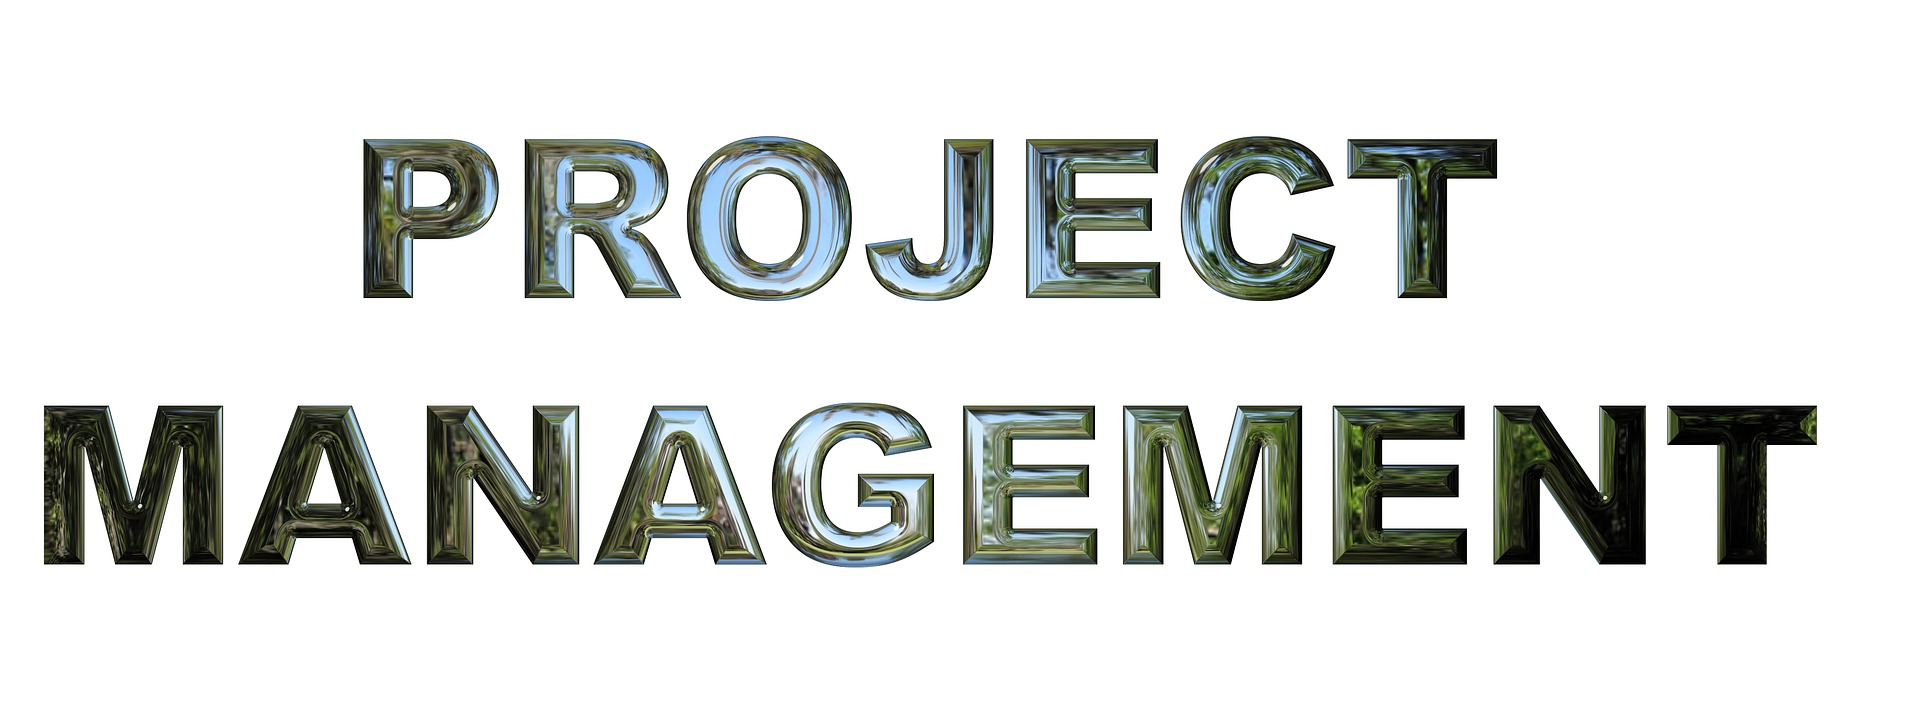 SEO project management is the process of planning, organizing, and controlling resources